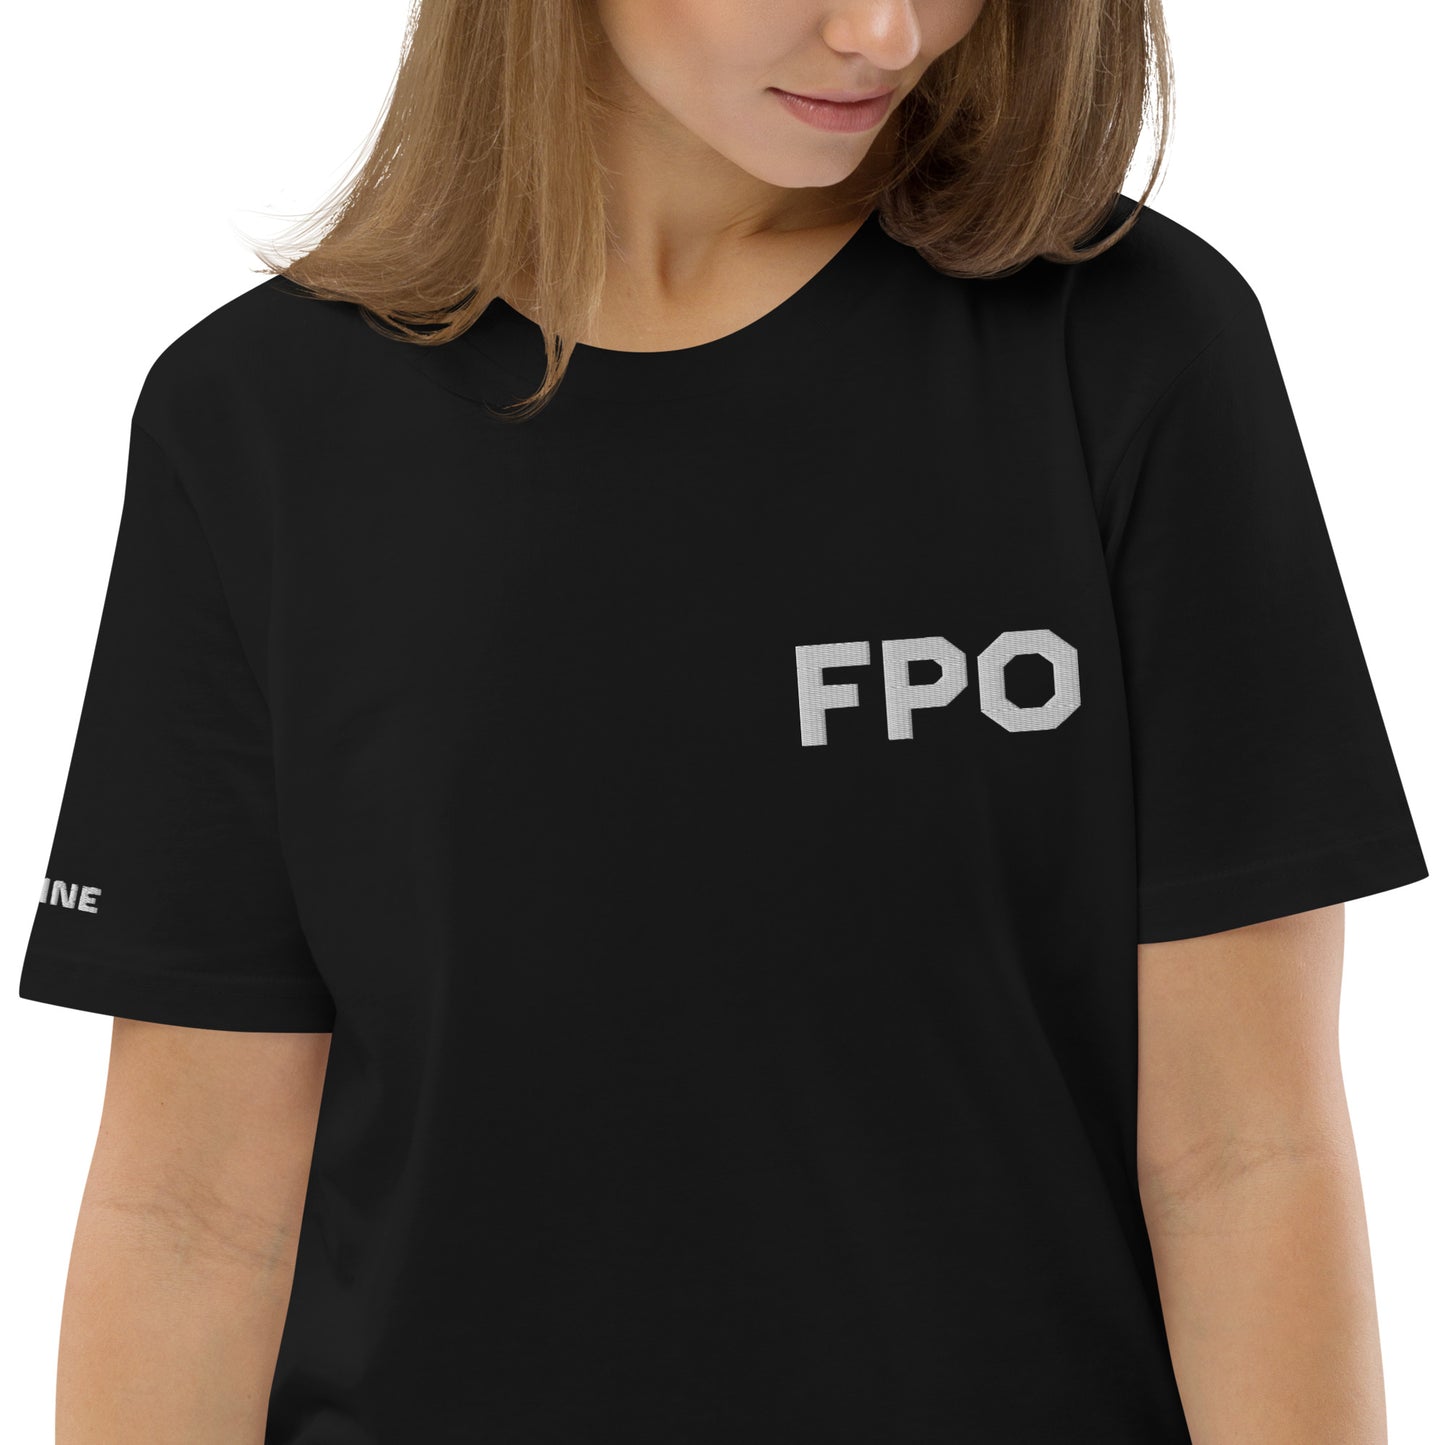 FPO Embroidered Unisex organic cotton t-shirt